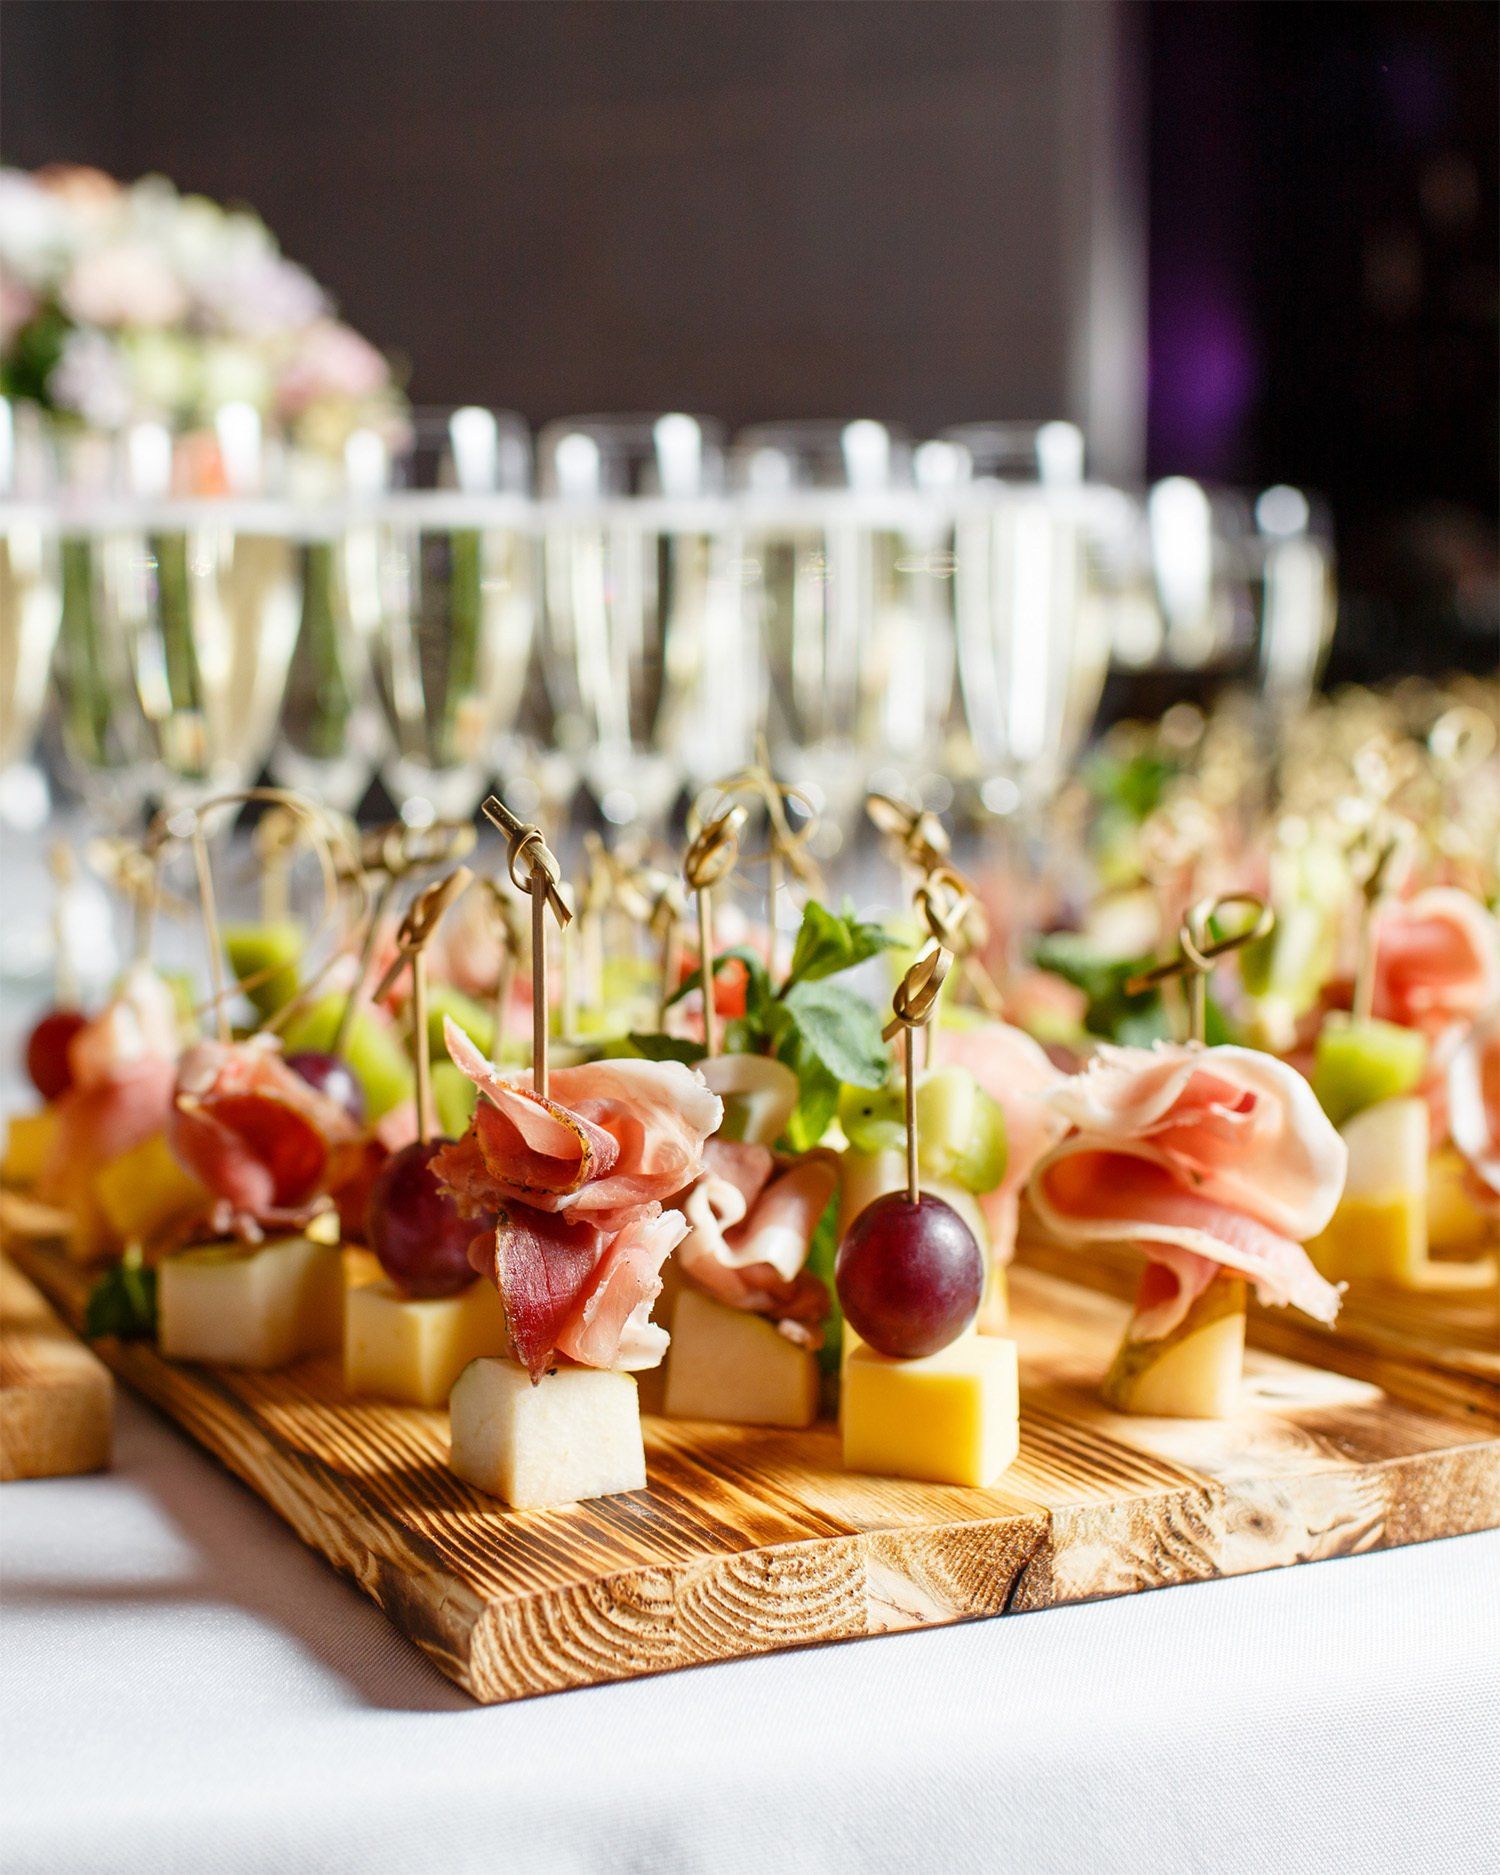 Wedding Catering: Choosing the Serving Style That’s Right For You